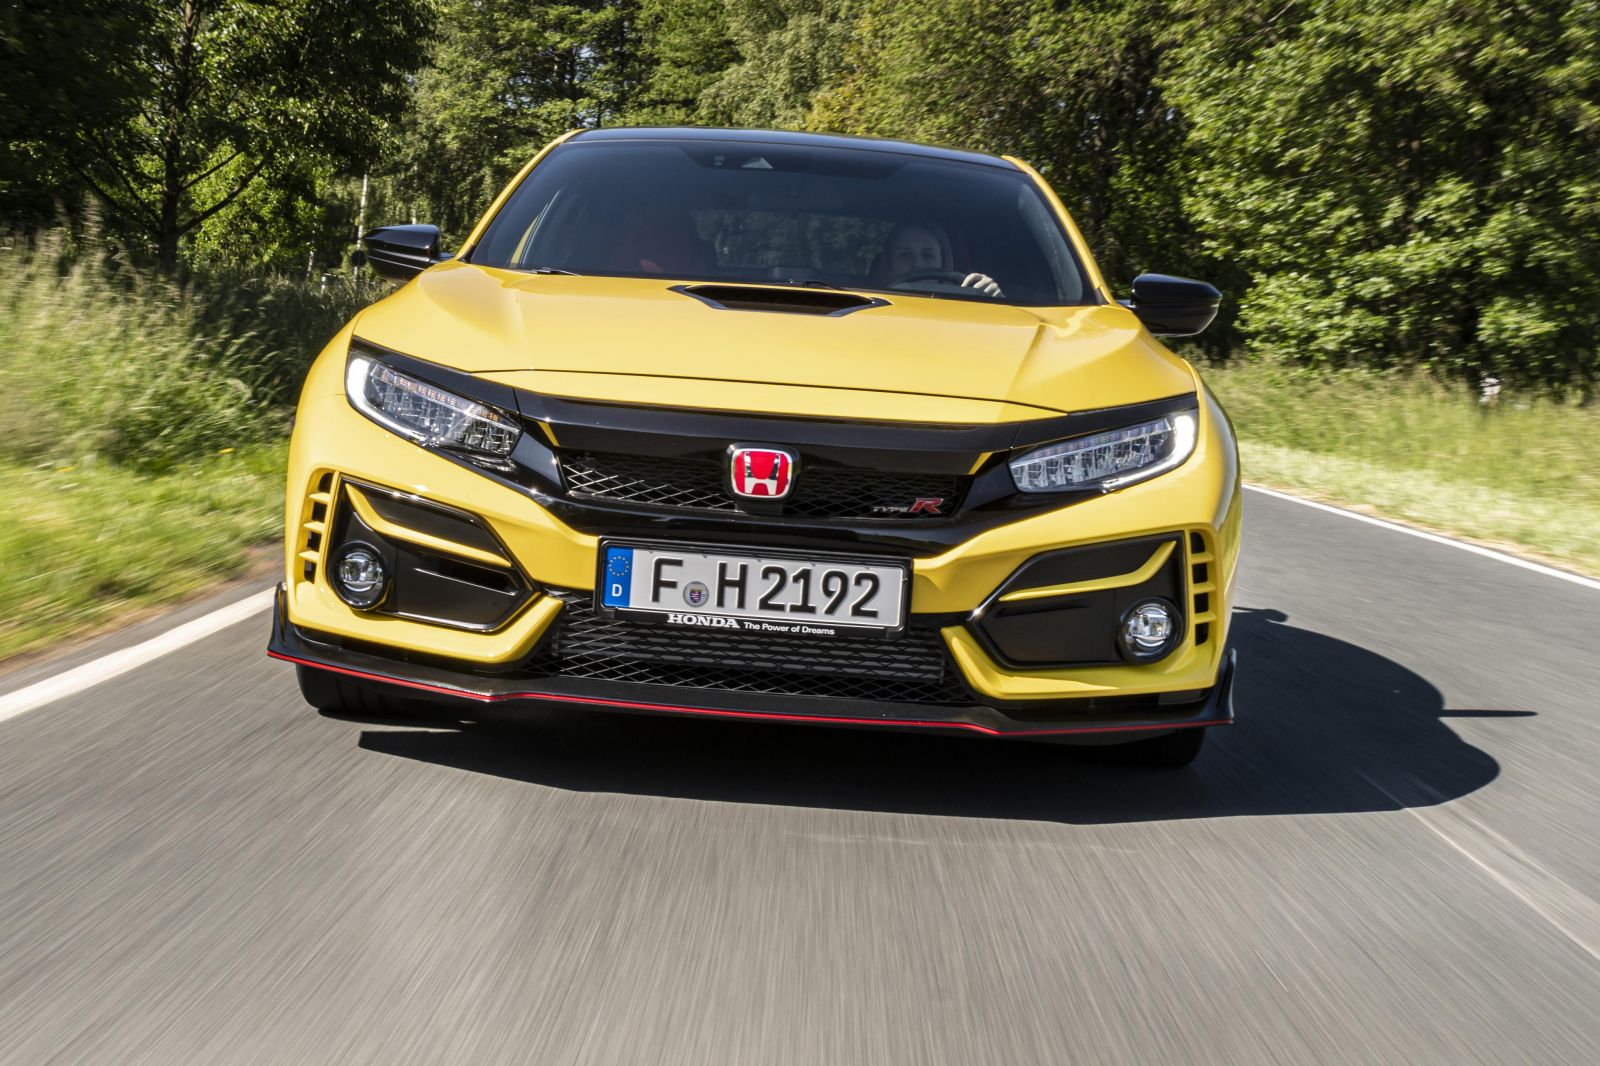 2021 Honda Civic Type R Limited Edition 70000 Hot Hatch To Be Sold